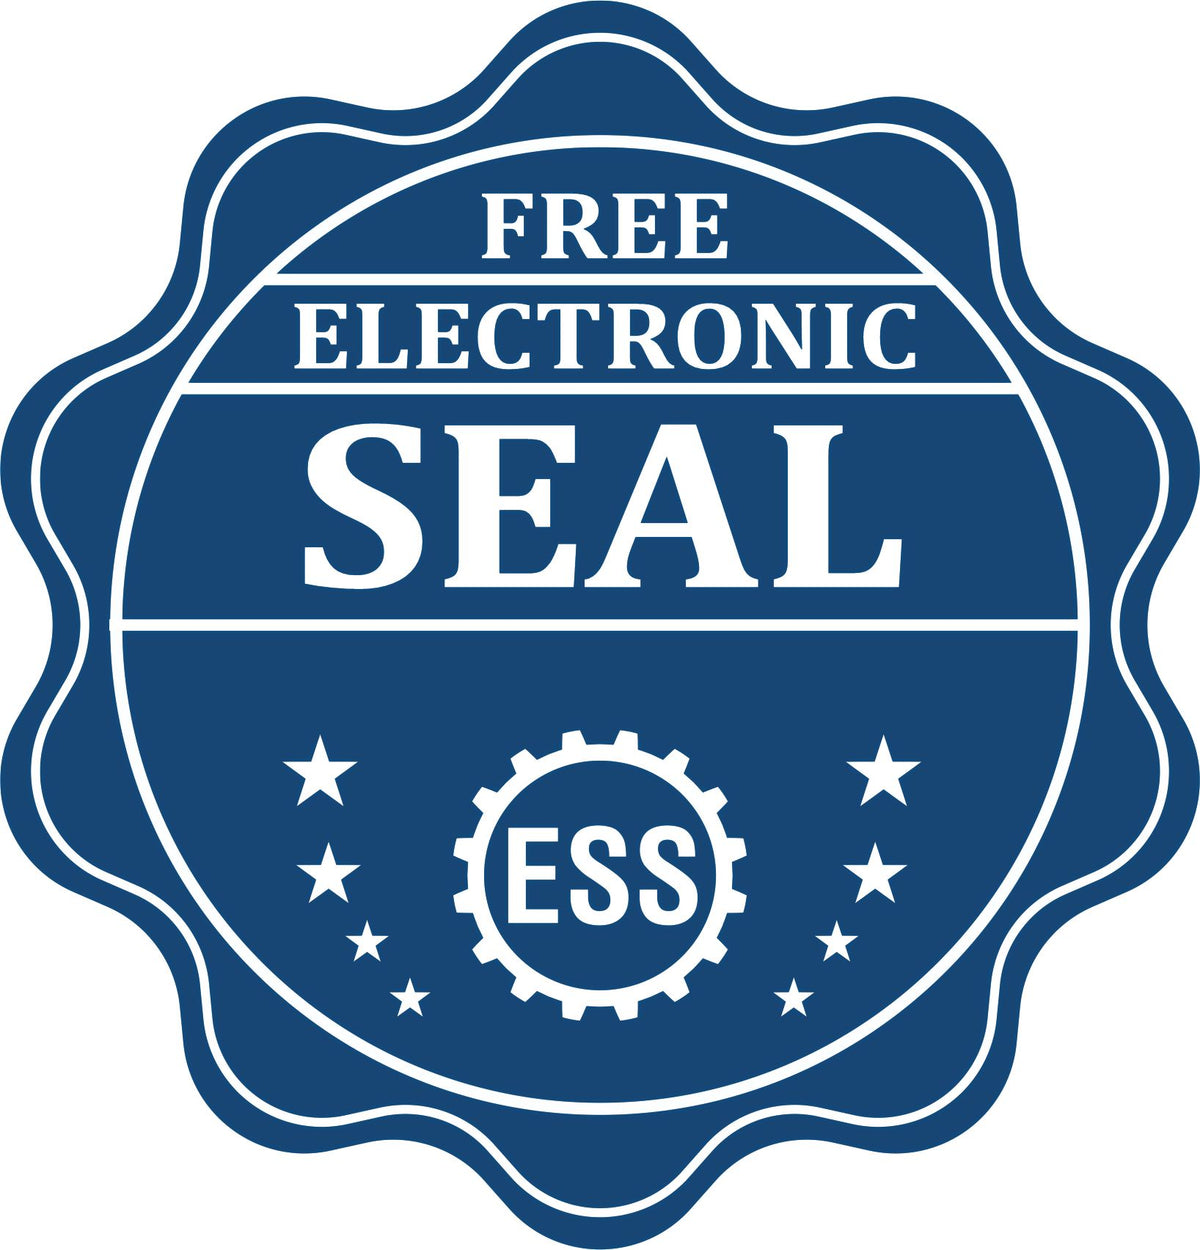 A badge showing a free electronic seal for the State of Oklahoma Long Reach Architectural Embossing Seal with stars and the ESS gear on the emblem.